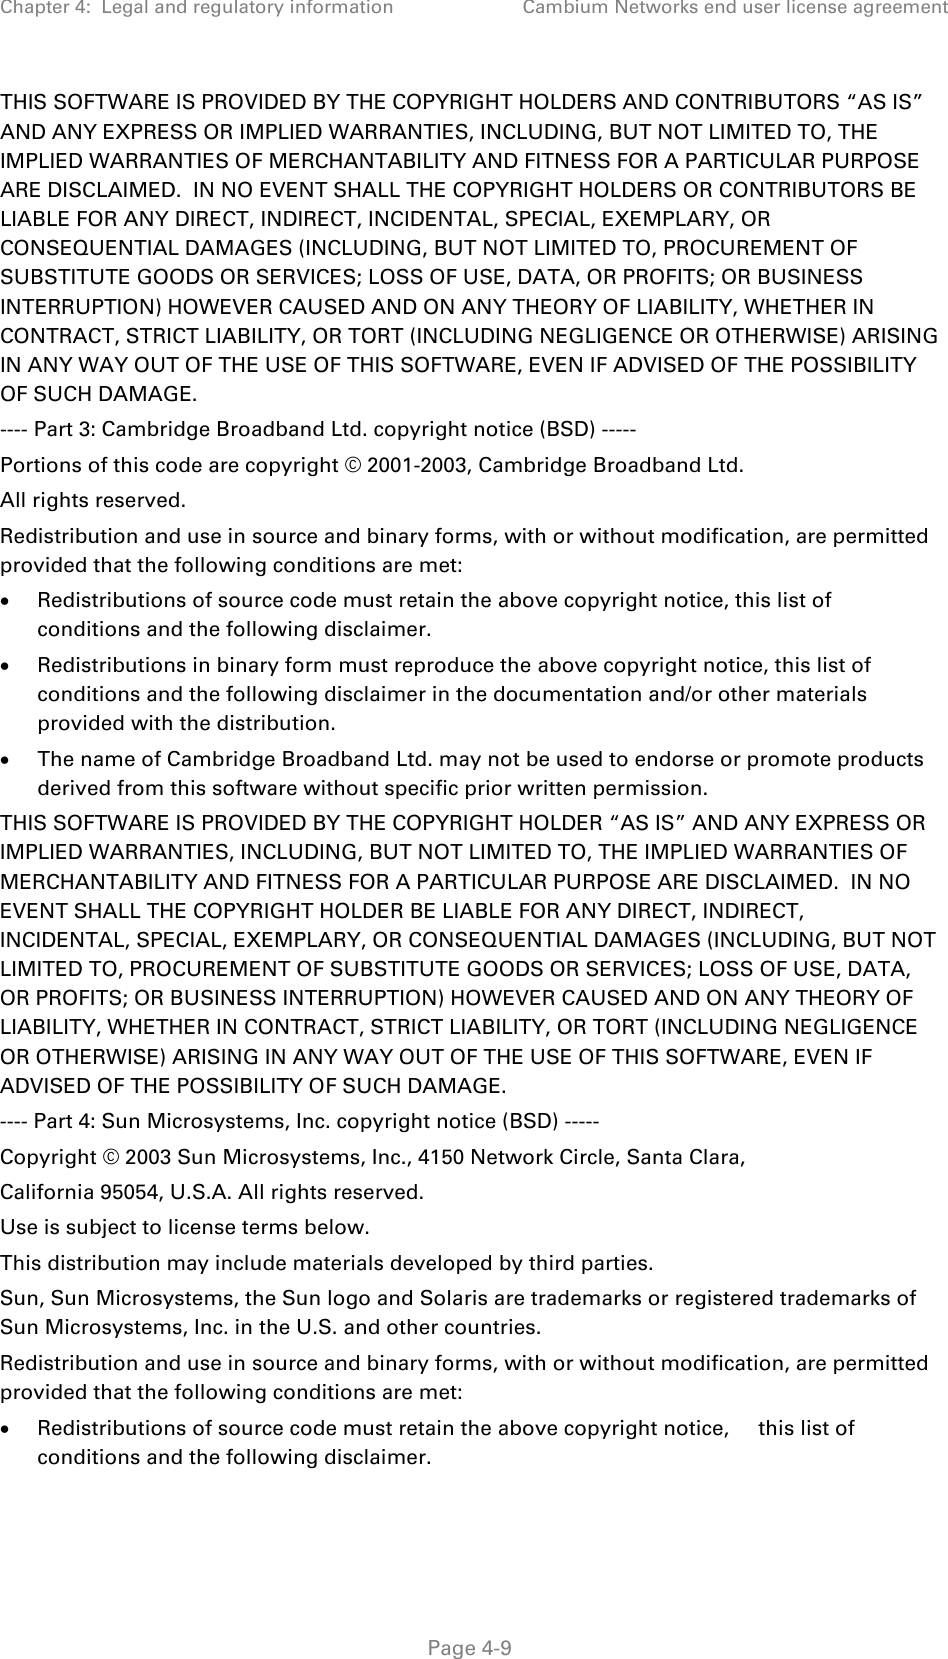 Chapter 4:  Legal and regulatory information Cambium Networks end user license agreement  THIS SOFTWARE IS PROVIDED BY THE COPYRIGHT HOLDERS AND CONTRIBUTORS “AS IS” AND ANY EXPRESS OR IMPLIED WARRANTIES, INCLUDING, BUT NOT LIMITED TO, THE IMPLIED WARRANTIES OF MERCHANTABILITY AND FITNESS FOR A PARTICULAR PURPOSE ARE DISCLAIMED.  IN NO EVENT SHALL THE COPYRIGHT HOLDERS OR CONTRIBUTORS BE LIABLE FOR ANY DIRECT, INDIRECT, INCIDENTAL, SPECIAL, EXEMPLARY, OR CONSEQUENTIAL DAMAGES (INCLUDING, BUT NOT LIMITED TO, PROCUREMENT OF SUBSTITUTE GOODS OR SERVICES; LOSS OF USE, DATA, OR PROFITS; OR BUSINESS INTERRUPTION) HOWEVER CAUSED AND ON ANY THEORY OF LIABILITY, WHETHER IN CONTRACT, STRICT LIABILITY, OR TORT (INCLUDING NEGLIGENCE OR OTHERWISE) ARISING IN ANY WAY OUT OF THE USE OF THIS SOFTWARE, EVEN IF ADVISED OF THE POSSIBILITY OF SUCH DAMAGE. ---- Part 3: Cambridge Broadband Ltd. copyright notice (BSD) ----- Portions of this code are copyright © 2001-2003, Cambridge Broadband Ltd. All rights reserved. Redistribution and use in source and binary forms, with or without modification, are permitted provided that the following conditions are met: • Redistributions of source code must retain the above copyright notice, this list of conditions and the following disclaimer. • Redistributions in binary form must reproduce the above copyright notice, this list of conditions and the following disclaimer in the documentation and/or other materials provided with the distribution. • The name of Cambridge Broadband Ltd. may not be used to endorse or promote products derived from this software without specific prior written permission.  THIS SOFTWARE IS PROVIDED BY THE COPYRIGHT HOLDER “AS IS” AND ANY EXPRESS OR IMPLIED WARRANTIES, INCLUDING, BUT NOT LIMITED TO, THE IMPLIED WARRANTIES OF MERCHANTABILITY AND FITNESS FOR A PARTICULAR PURPOSE ARE DISCLAIMED.  IN NO EVENT SHALL THE COPYRIGHT HOLDER BE LIABLE FOR ANY DIRECT, INDIRECT, INCIDENTAL, SPECIAL, EXEMPLARY, OR CONSEQUENTIAL DAMAGES (INCLUDING, BUT NOT LIMITED TO, PROCUREMENT OF SUBSTITUTE GOODS OR SERVICES; LOSS OF USE, DATA, OR PROFITS; OR BUSINESS INTERRUPTION) HOWEVER CAUSED AND ON ANY THEORY OF LIABILITY, WHETHER IN CONTRACT, STRICT LIABILITY, OR TORT (INCLUDING NEGLIGENCE OR OTHERWISE) ARISING IN ANY WAY OUT OF THE USE OF THIS SOFTWARE, EVEN IF ADVISED OF THE POSSIBILITY OF SUCH DAMAGE. ---- Part 4: Sun Microsystems, Inc. copyright notice (BSD) ----- Copyright © 2003 Sun Microsystems, Inc., 4150 Network Circle, Santa Clara, California 95054, U.S.A. All rights reserved. Use is subject to license terms below. This distribution may include materials developed by third parties. Sun, Sun Microsystems, the Sun logo and Solaris are trademarks or registered trademarks of Sun Microsystems, Inc. in the U.S. and other countries. Redistribution and use in source and binary forms, with or without modification, are permitted provided that the following conditions are met: • Redistributions of source code must retain the above copyright notice,     this list of conditions and the following disclaimer.  Page 4-9 